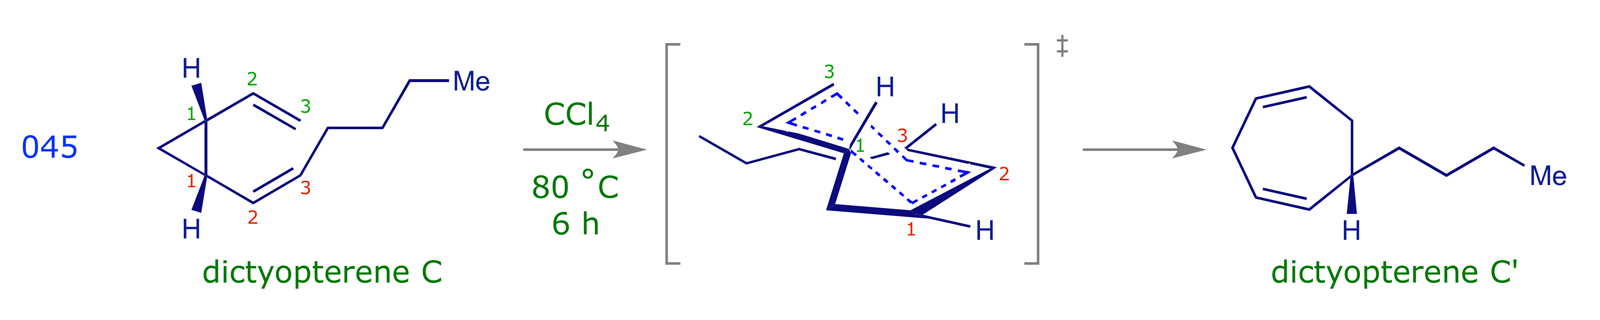 The Cope rearrangement providing dictyopterene C' from dictyopterene C